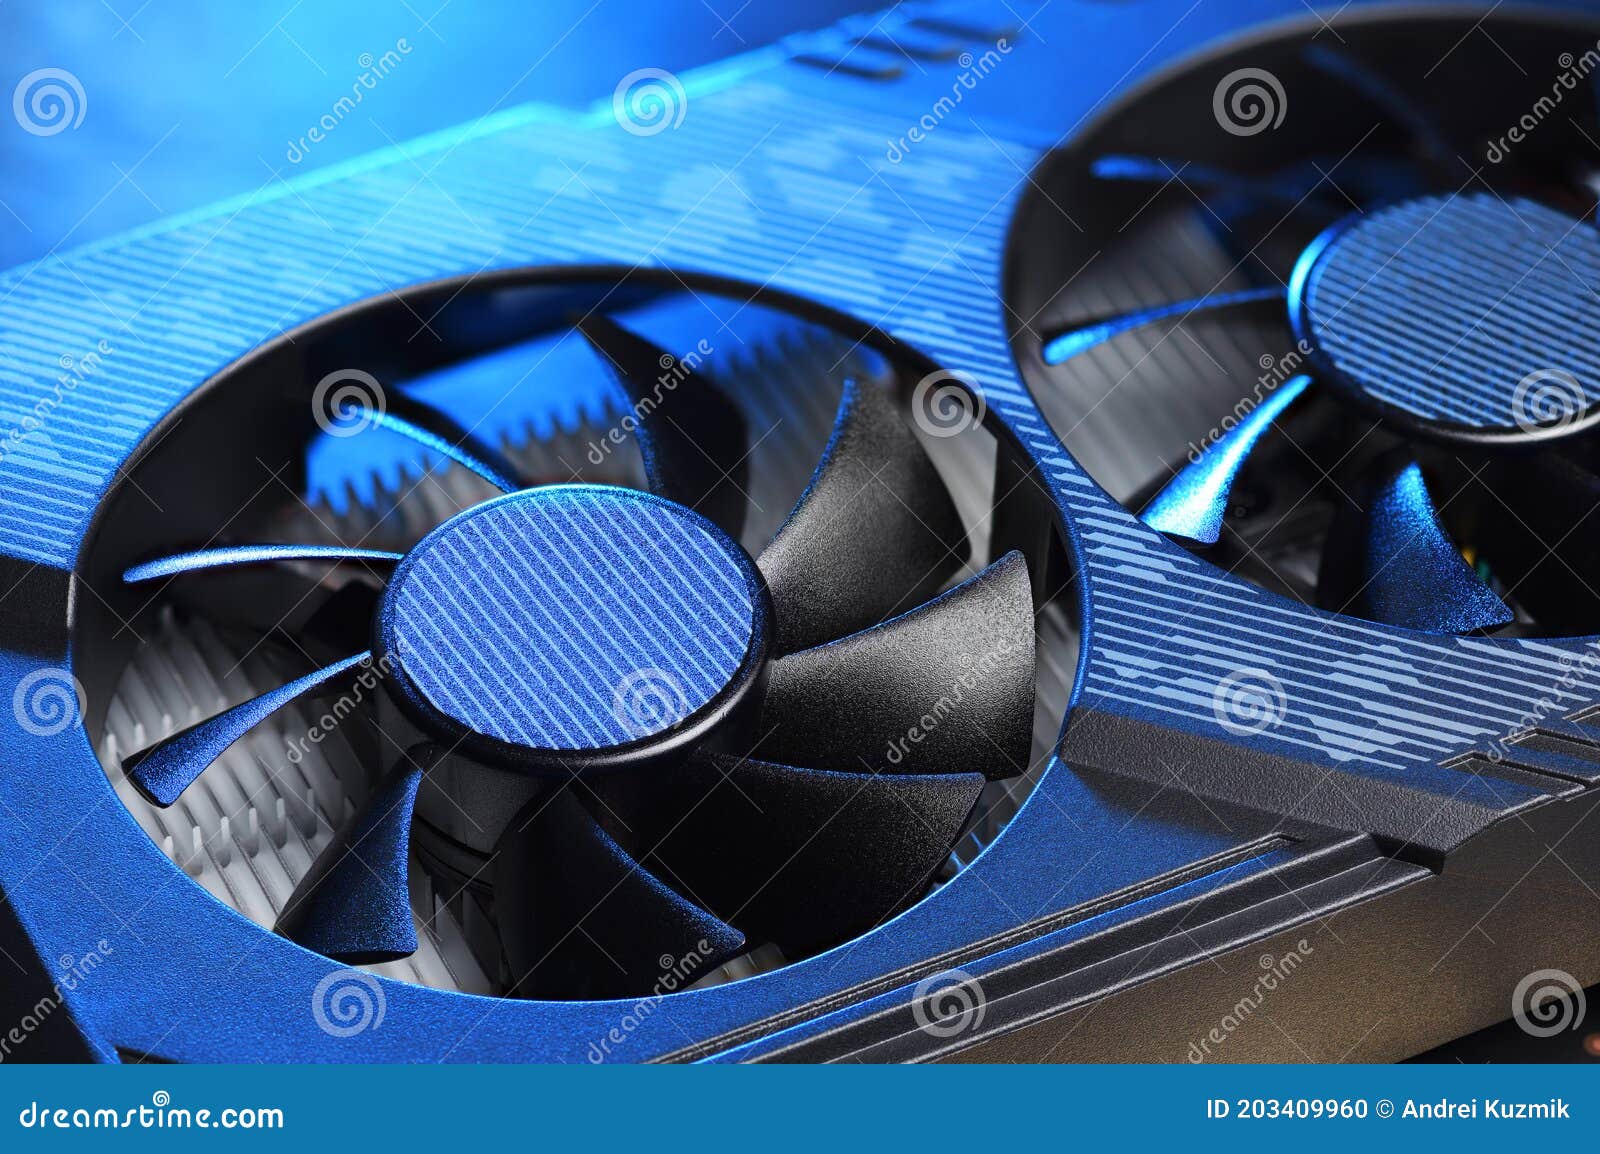 computer gaming gpu graphic card with fan